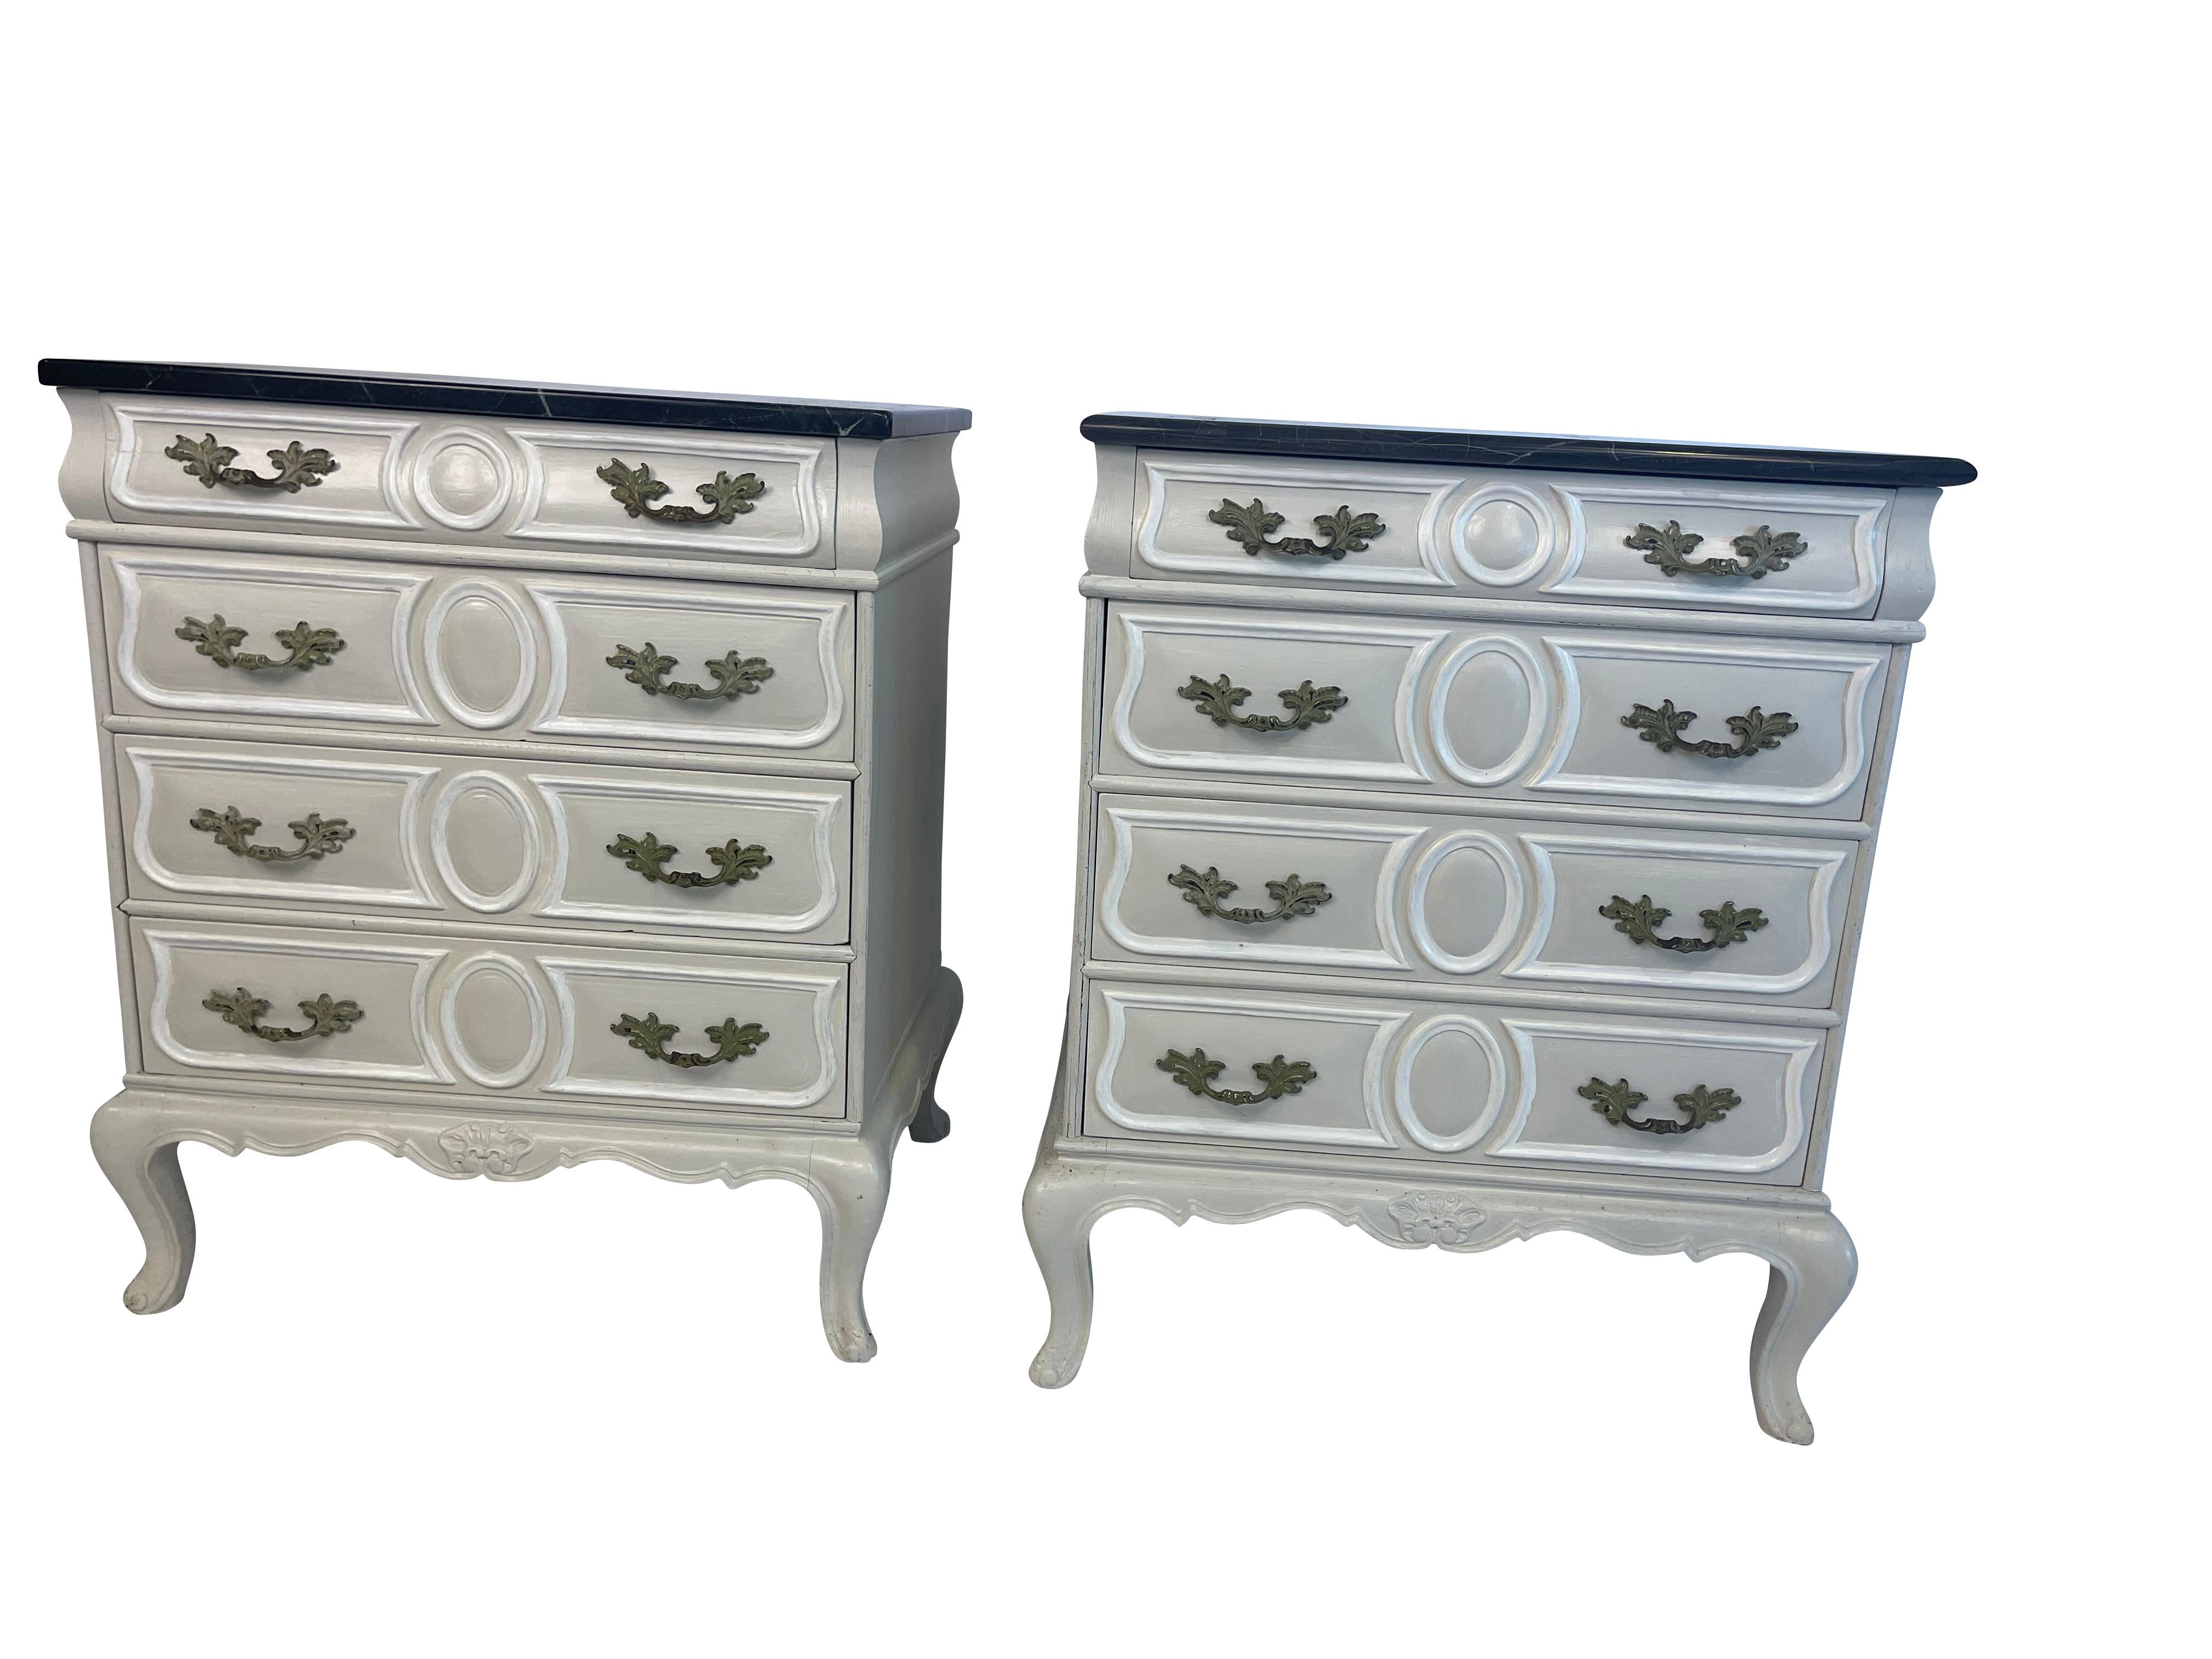 Antique pair of French style paint decorated bed side tables with marble tops. Painted in grey with white decorative trim. Mis matched marble tops.